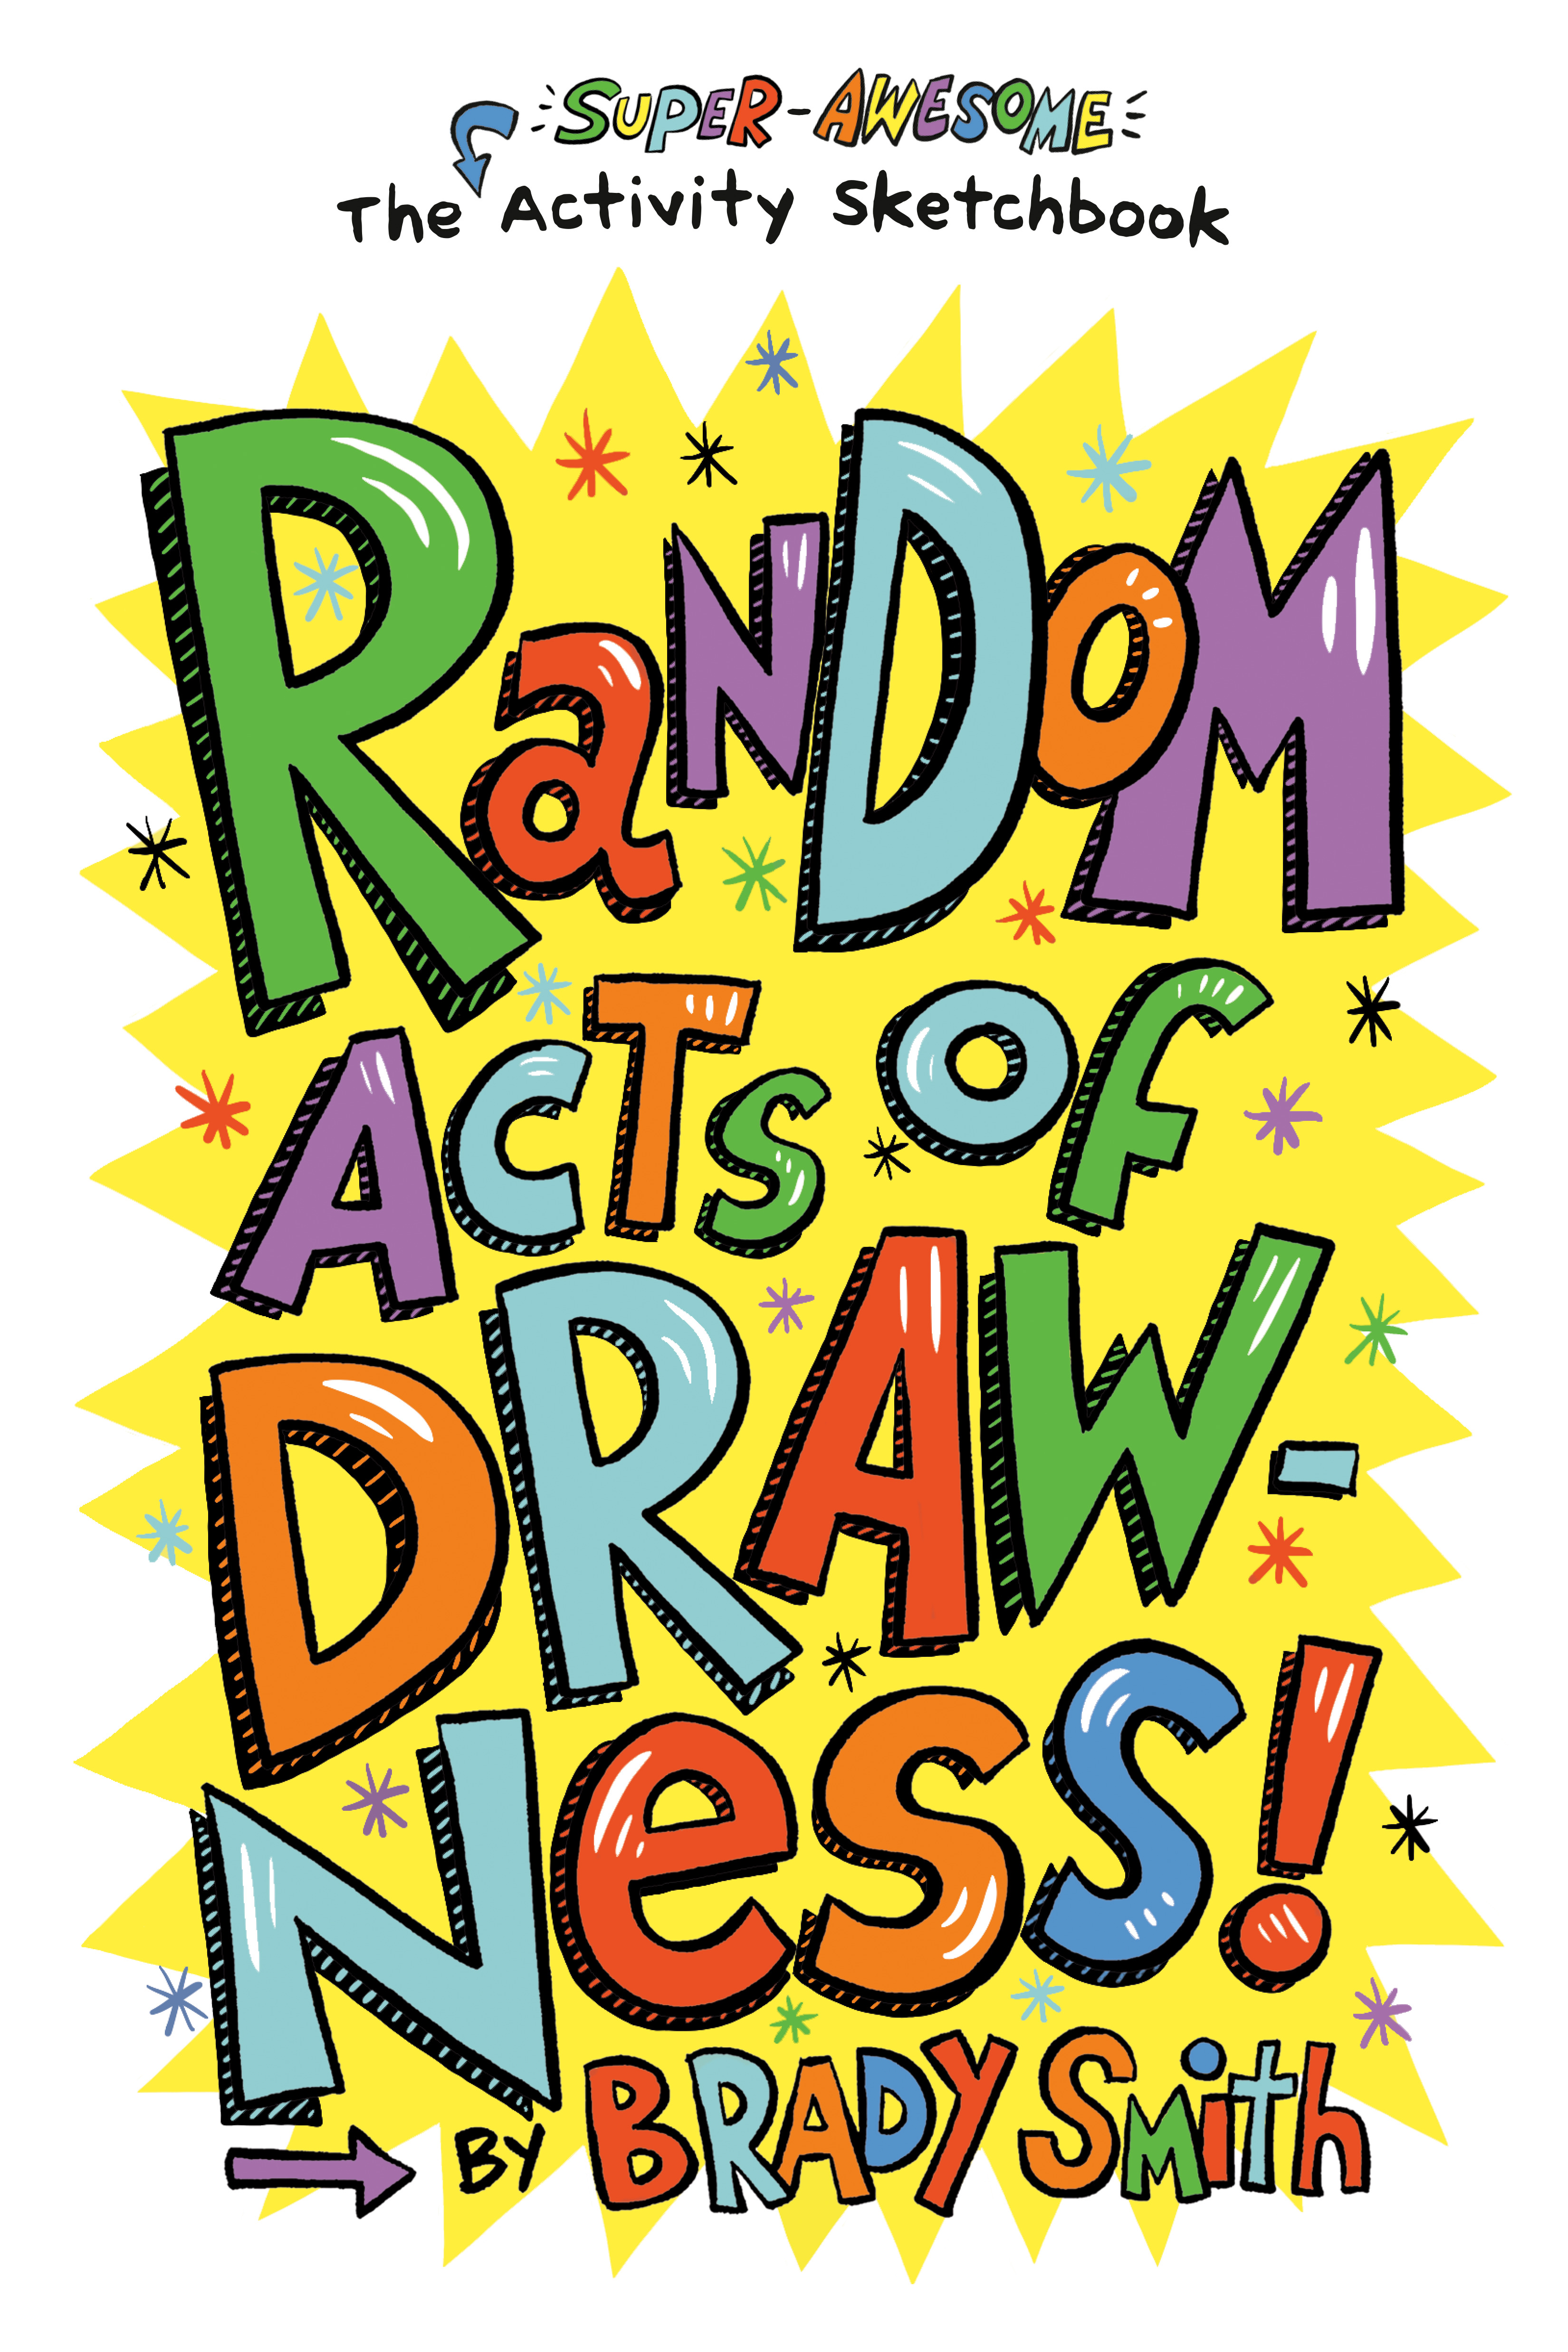 Random Acts of Drawness! : The Super-Awesome Activity Sketchbook | Smith, Brady